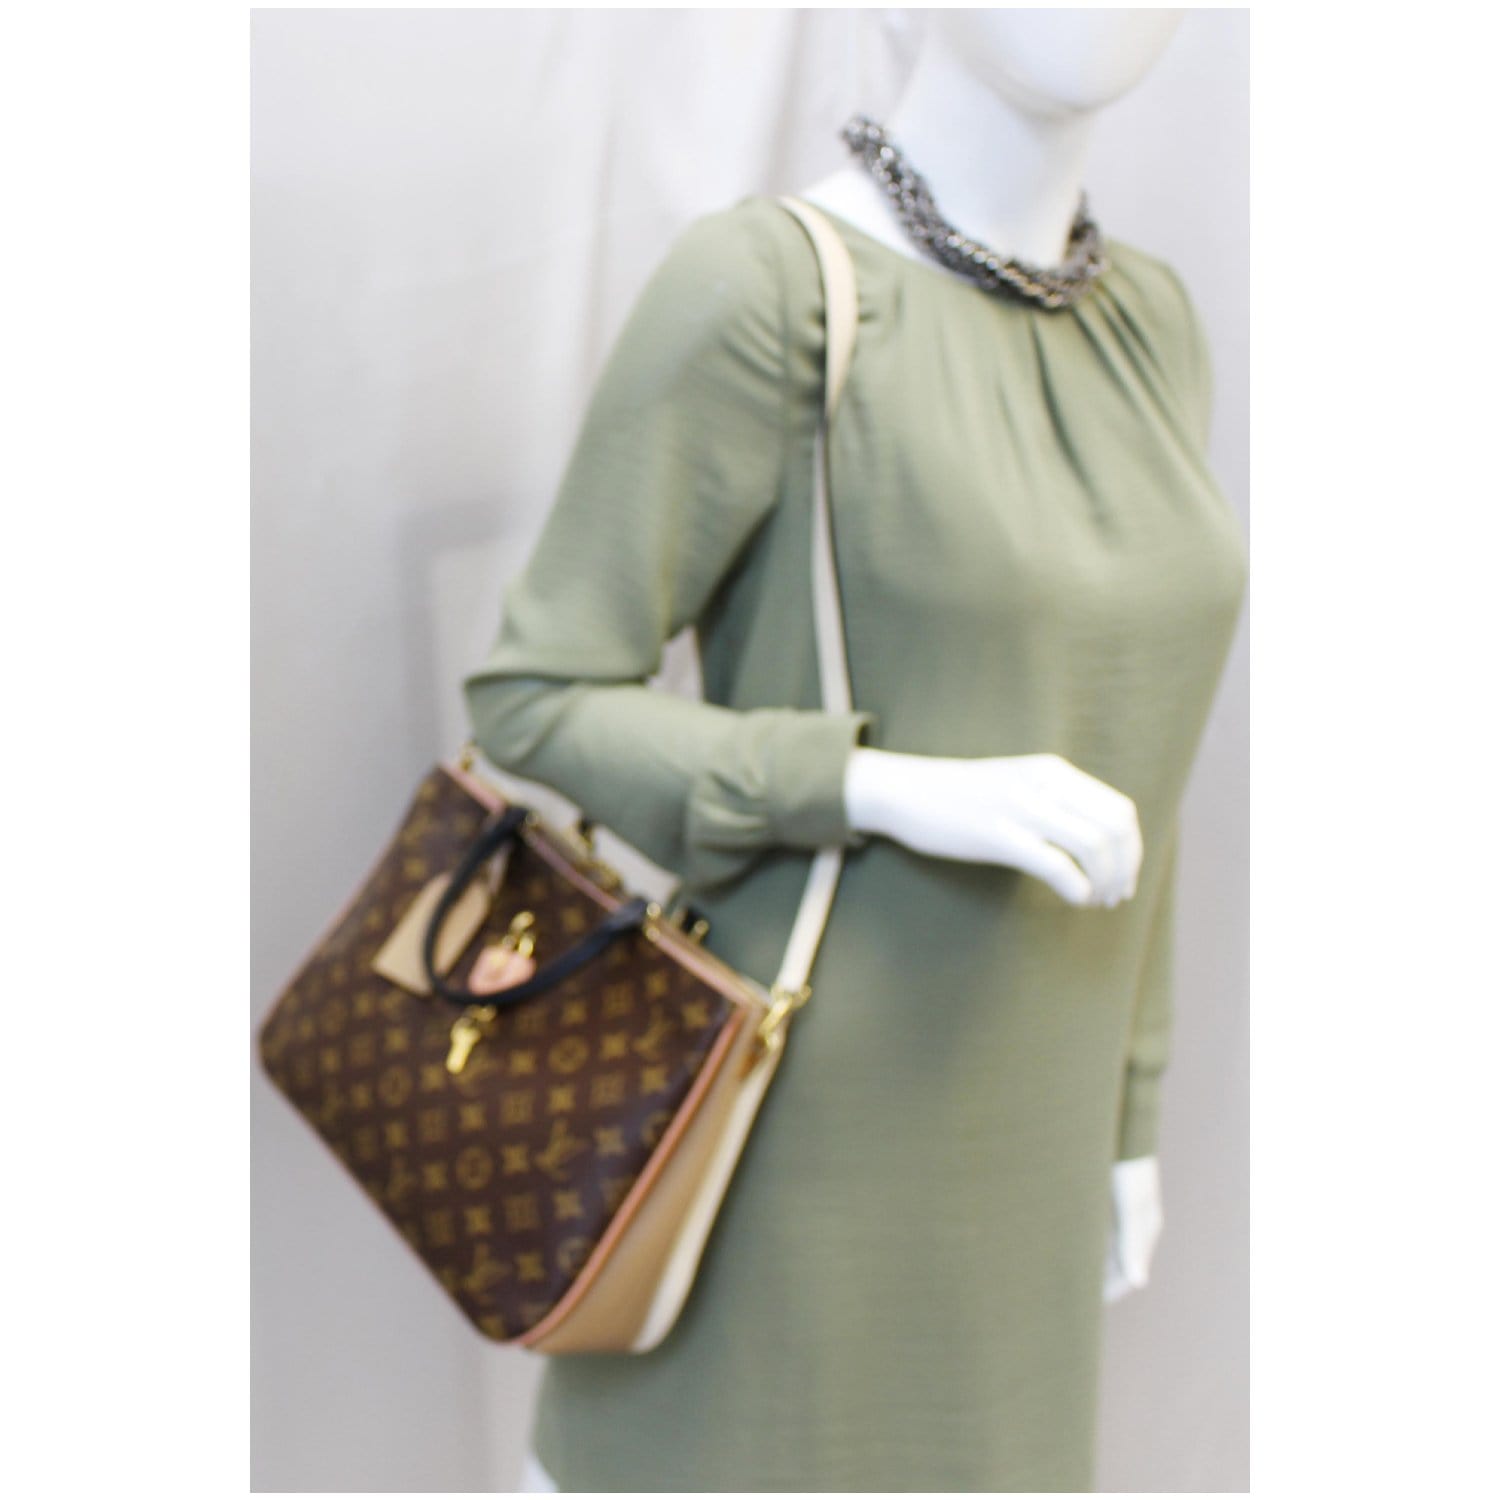 Millefeuille Handbag Monogram Canvas and Leather